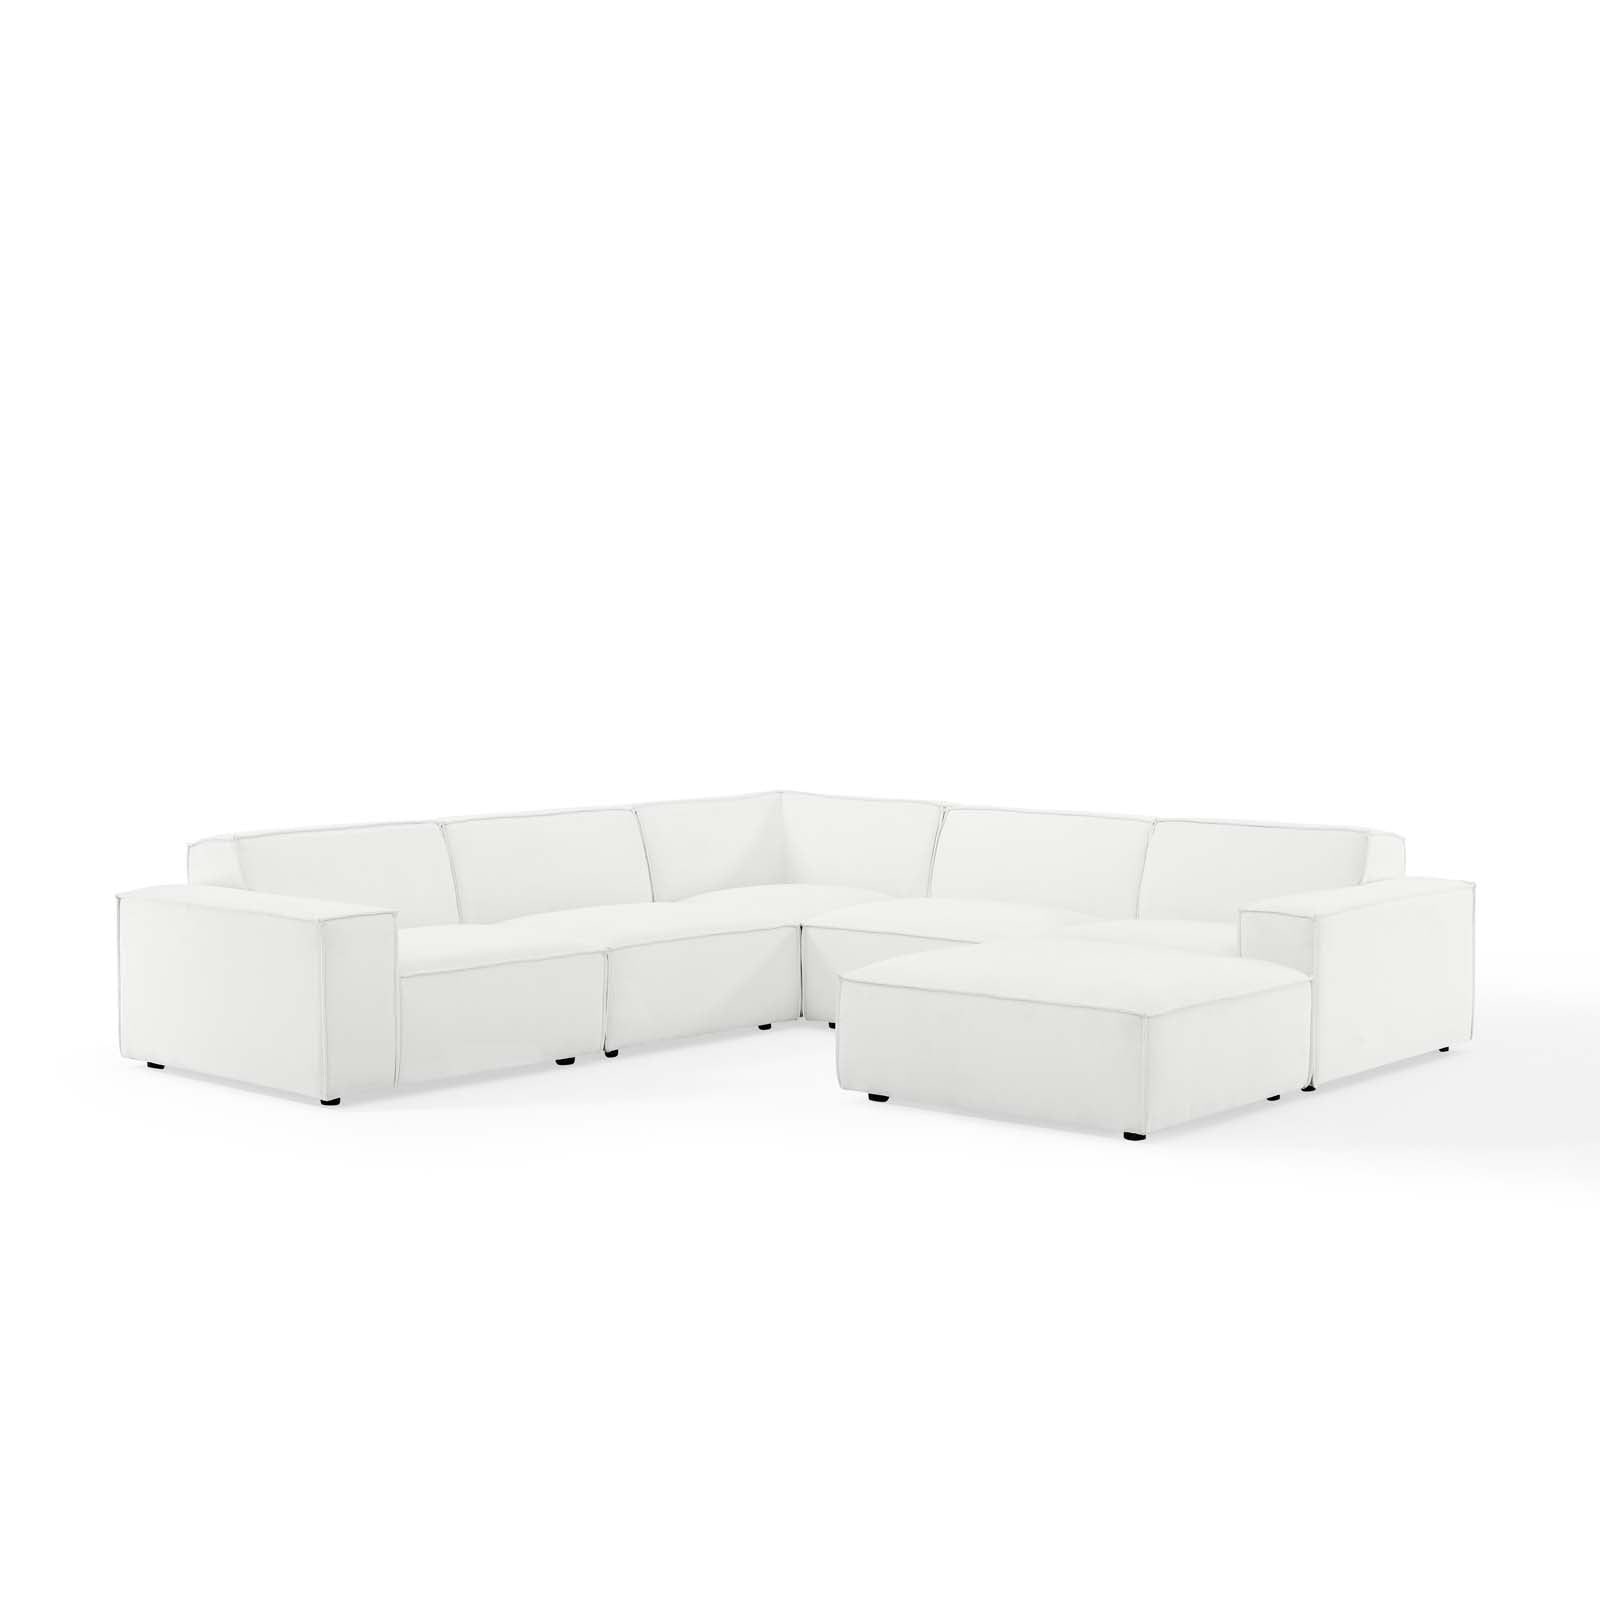 Modway Sectional Sofas - Restore 6-Piece Sectional Sofa White 122"